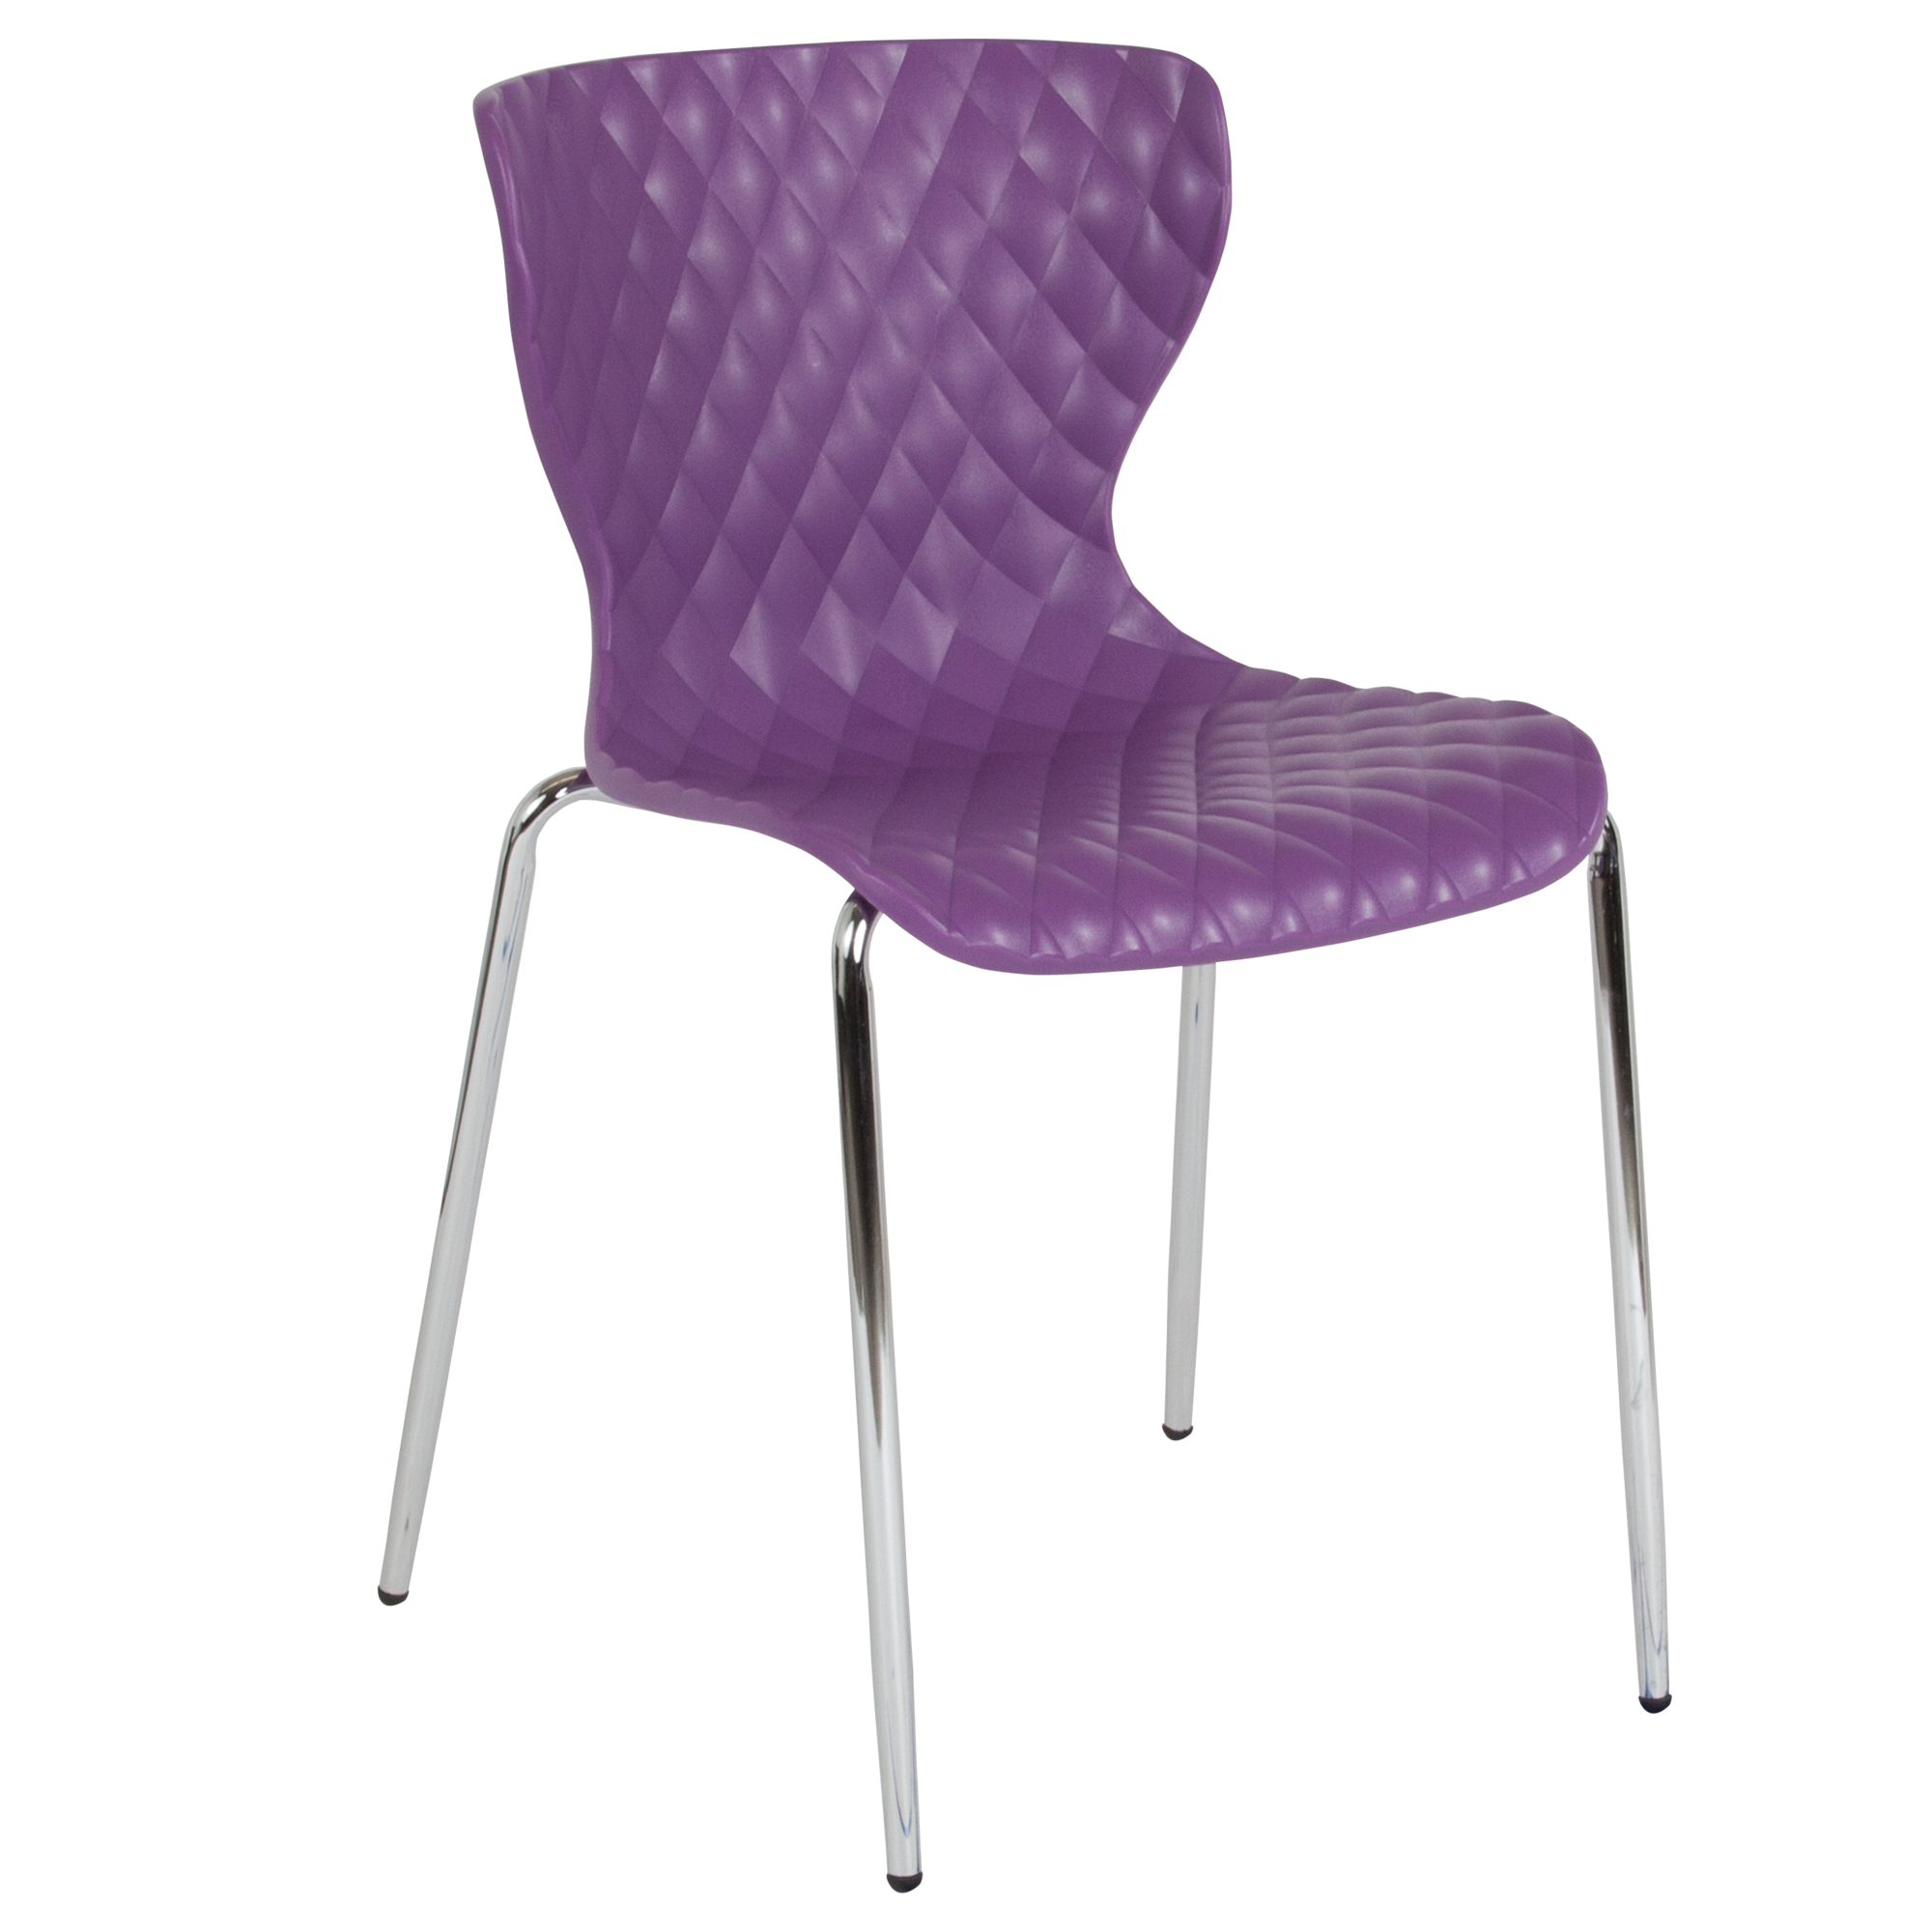 Flash Furniture, Contemporary Purple Plastic Stack Chair, Primary Color Purple, Included (qty.) 1, Model LF707CPUR